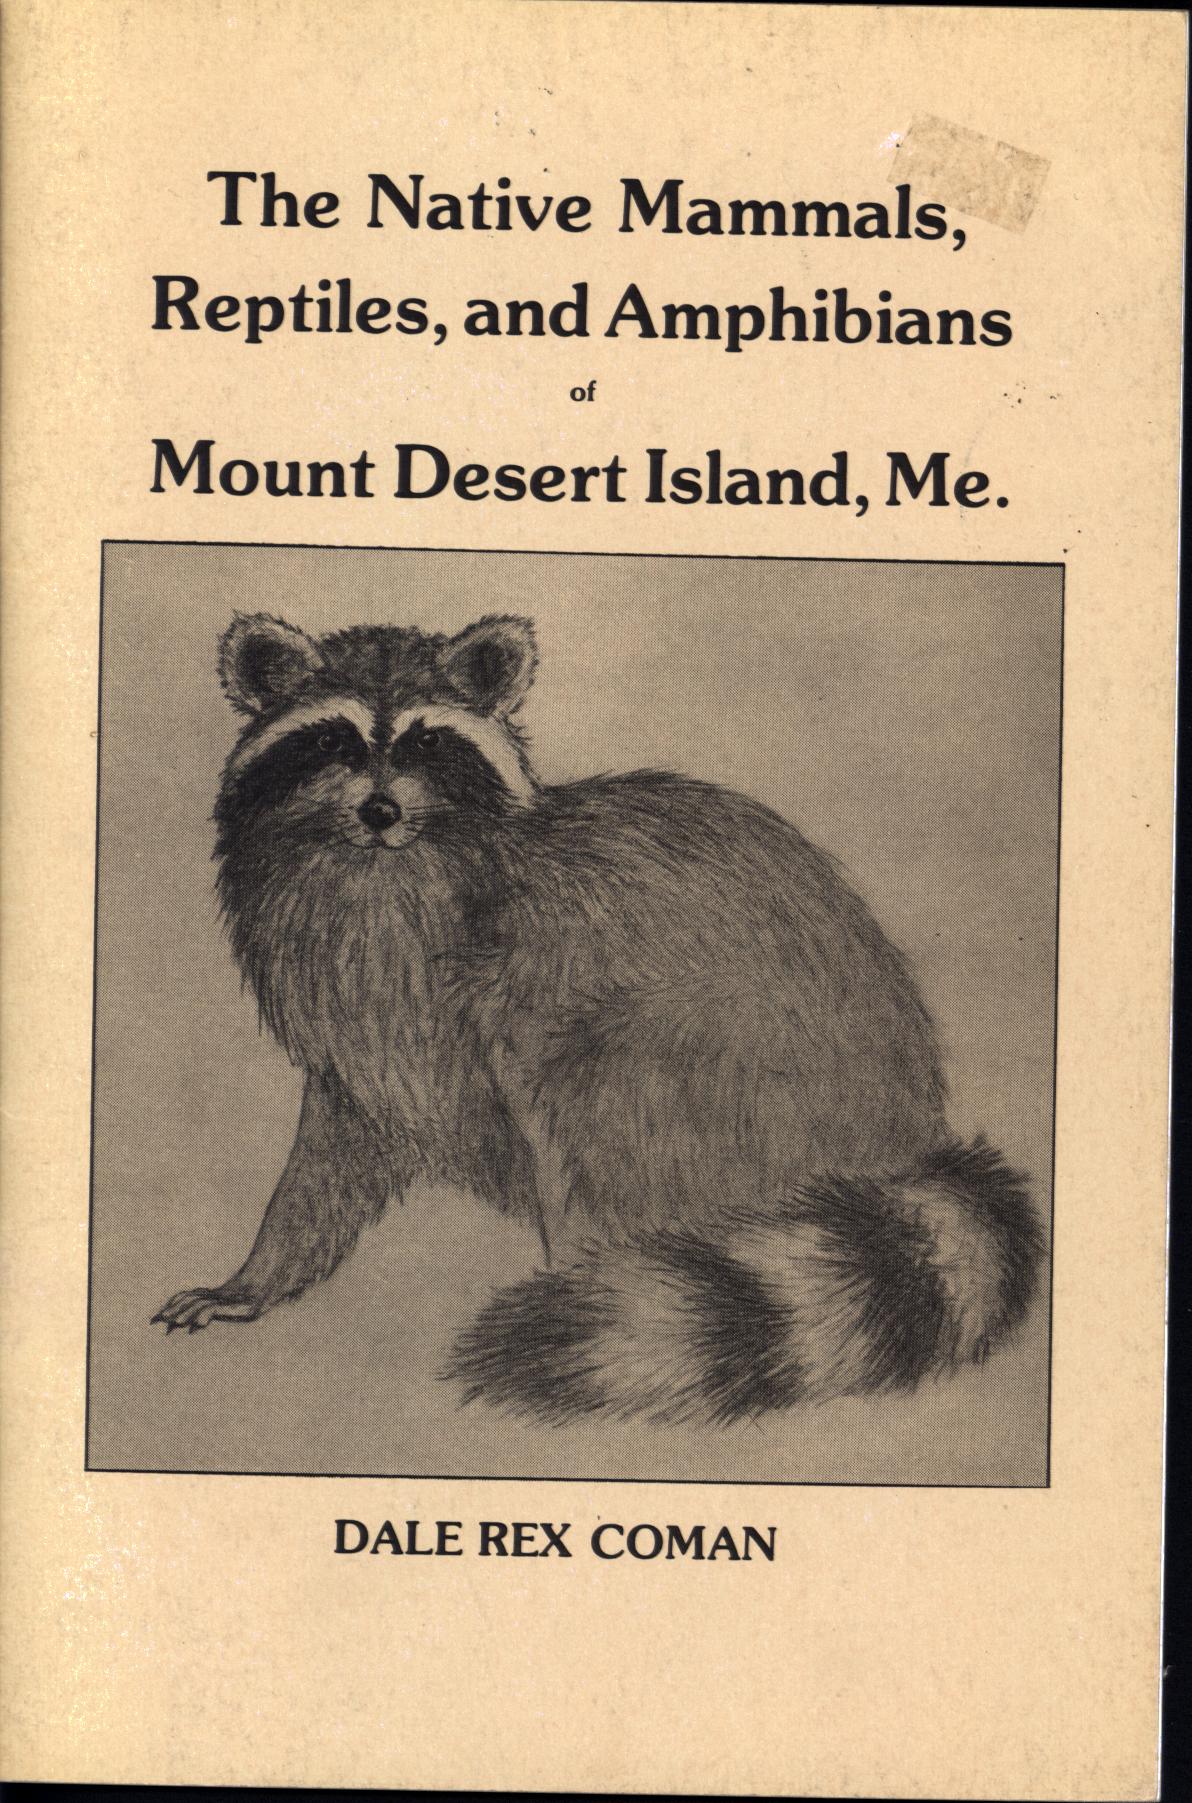 THE NATIVE MAMMALS, REPTILES, and AMPHIBIANS OF MOUNT DESERT ISLAND, MAINE. 